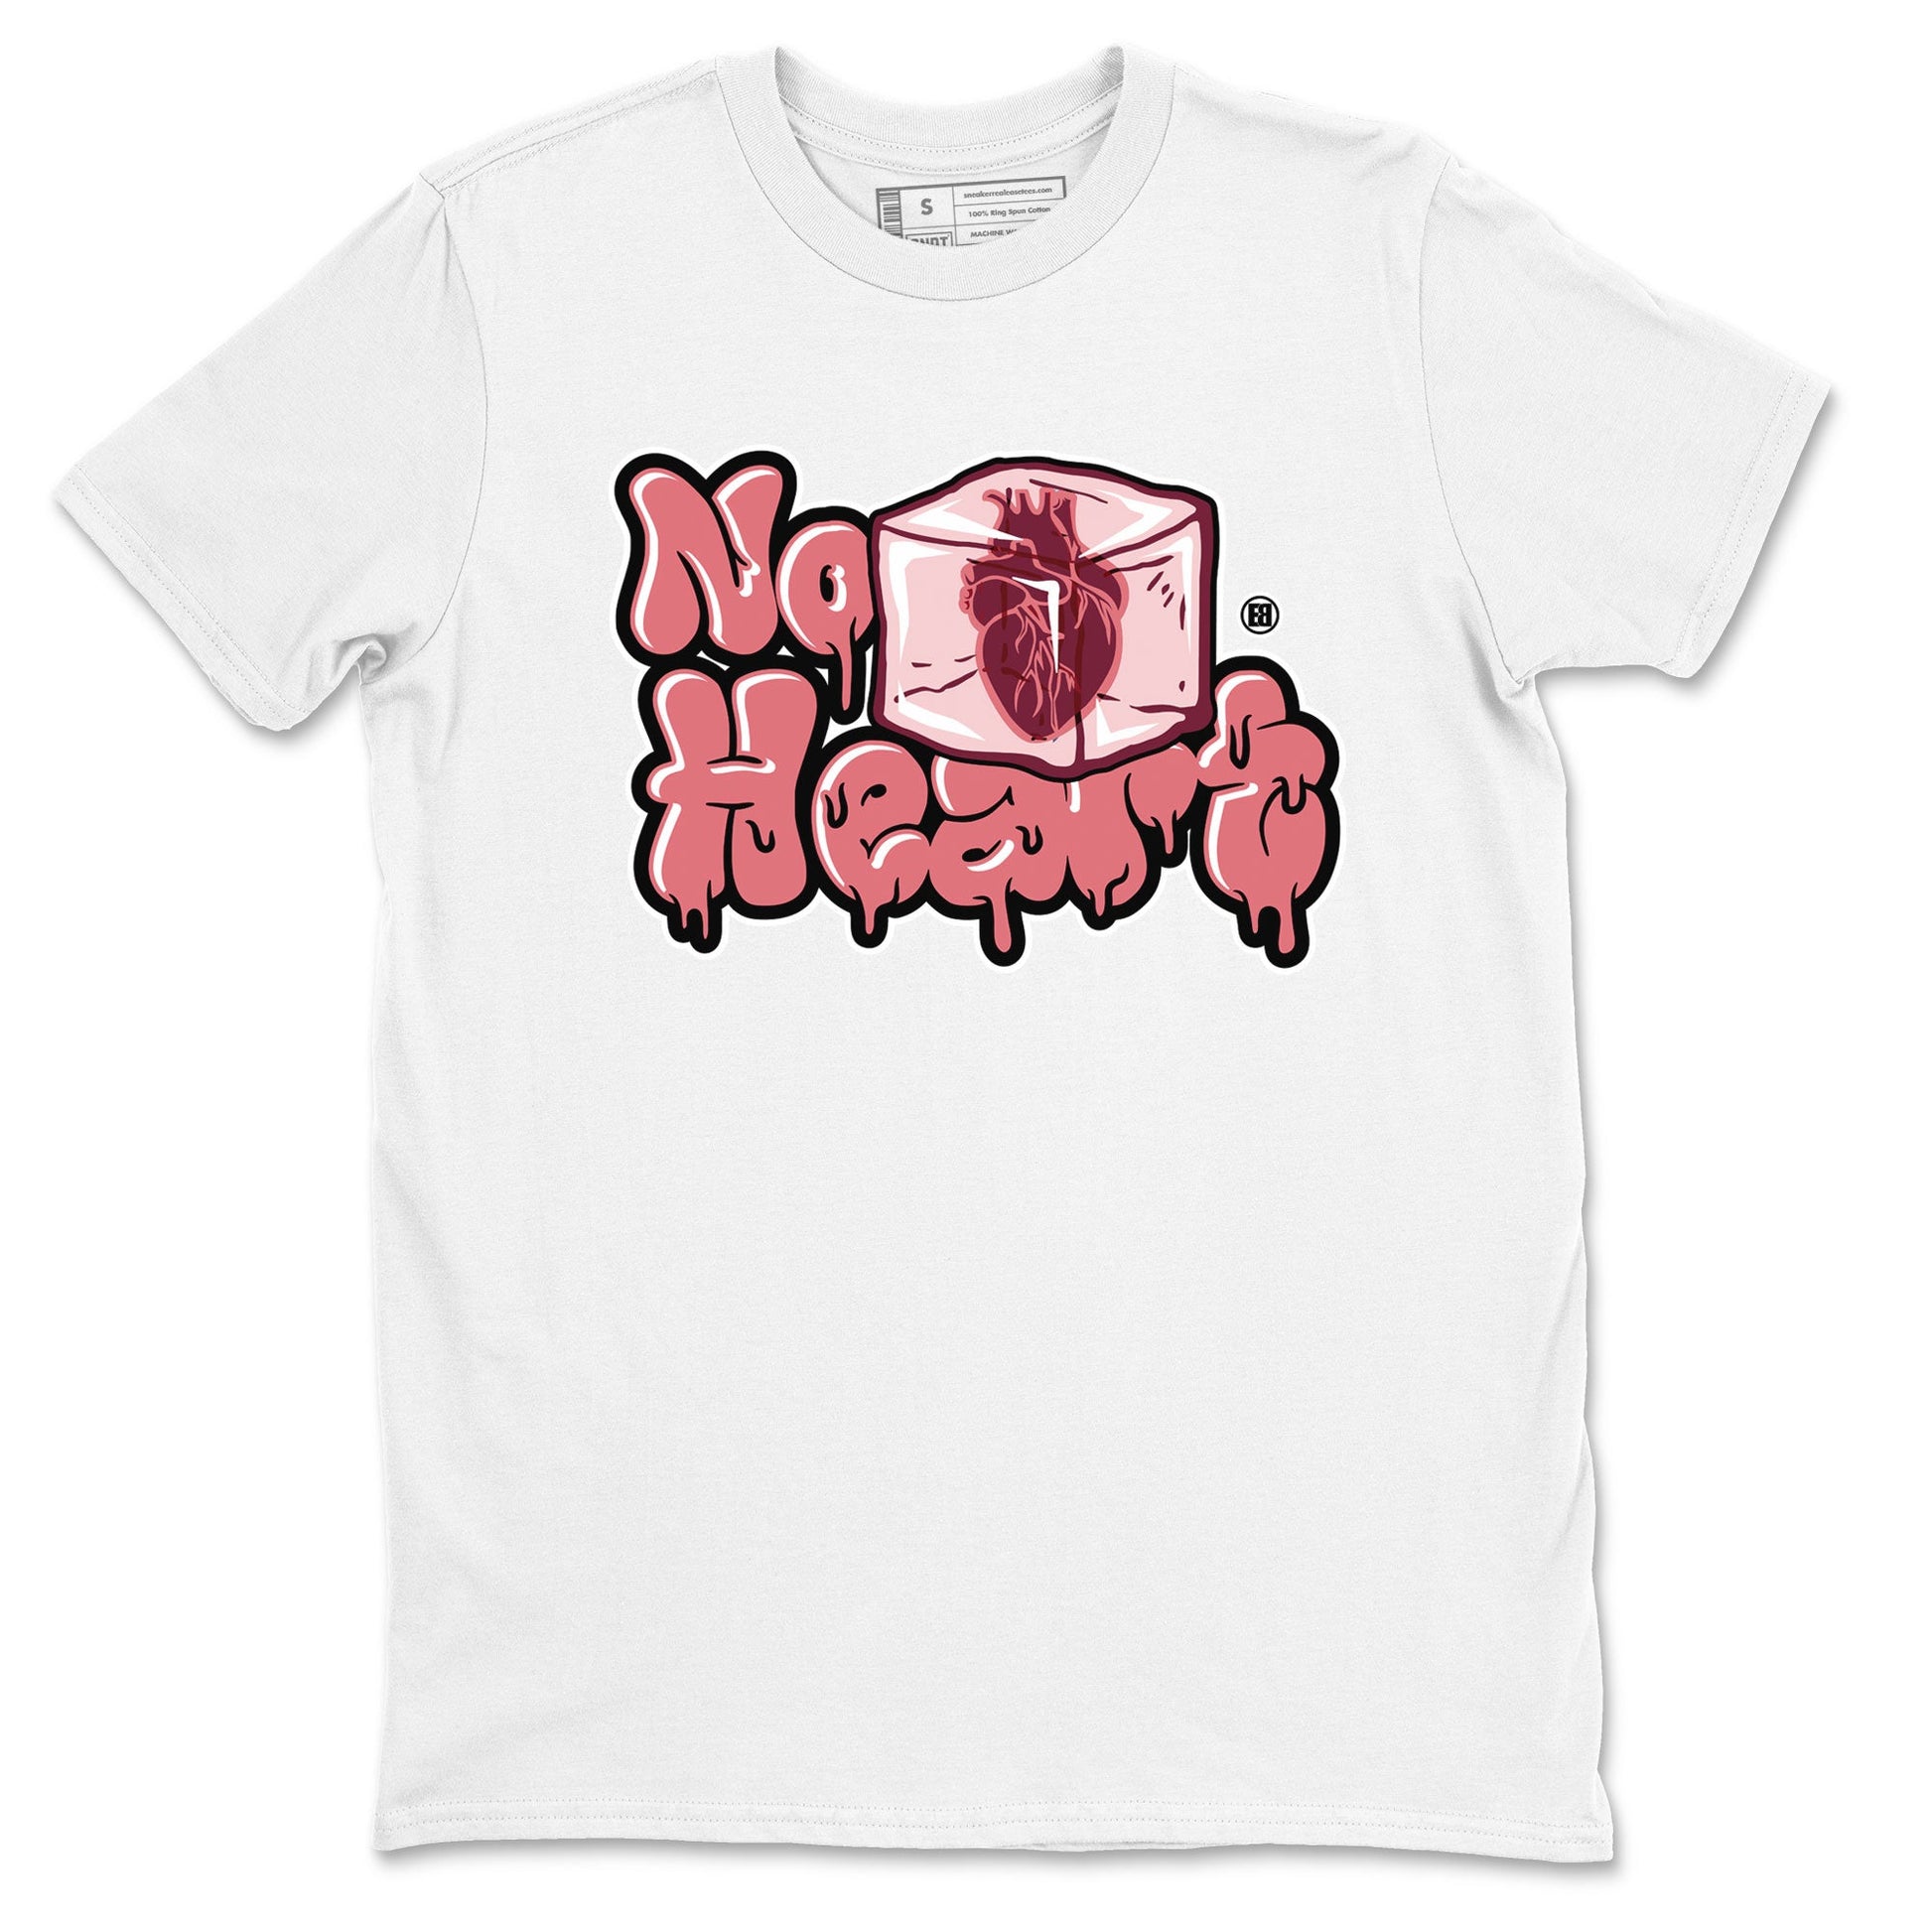 Dunk Valentines Day shirt to match jordans No Hearts sneaker tees Dunk Low Valentine's Day SNRT Sneaker Release Tees Cotton Sneaker Tee White 2 T-Shirt